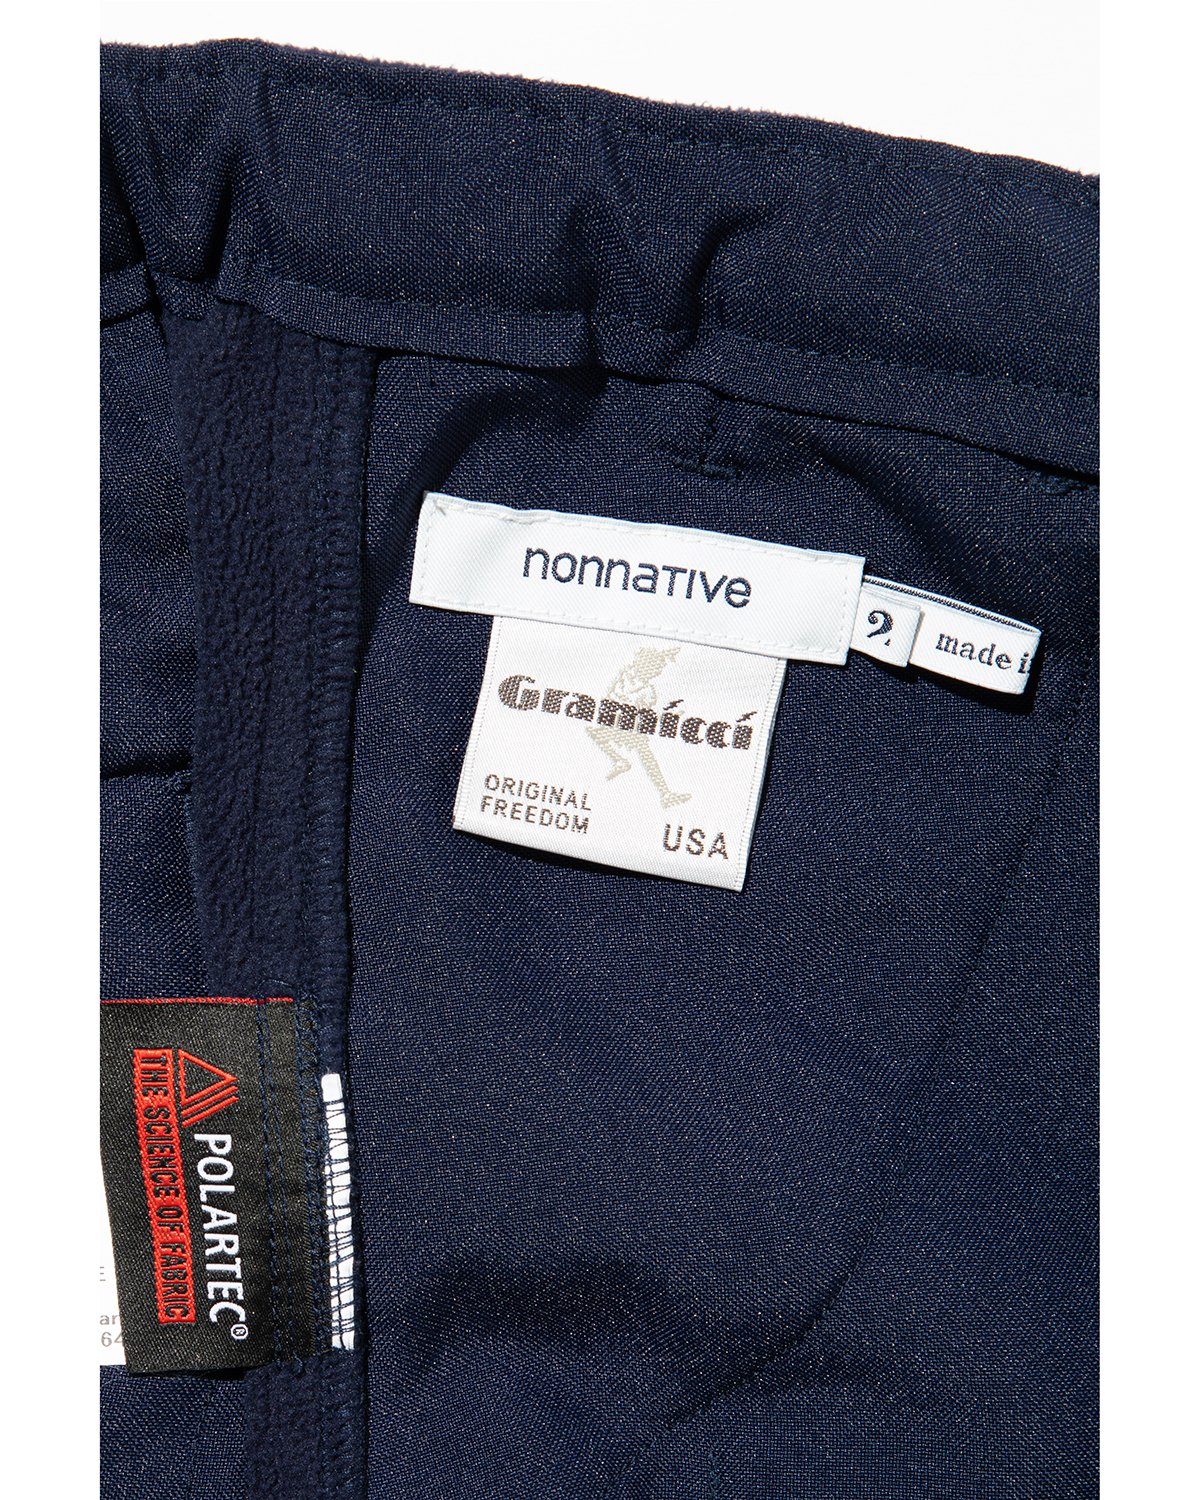 nonnative and Gramicci Rework the Climber Easy Pants Using 